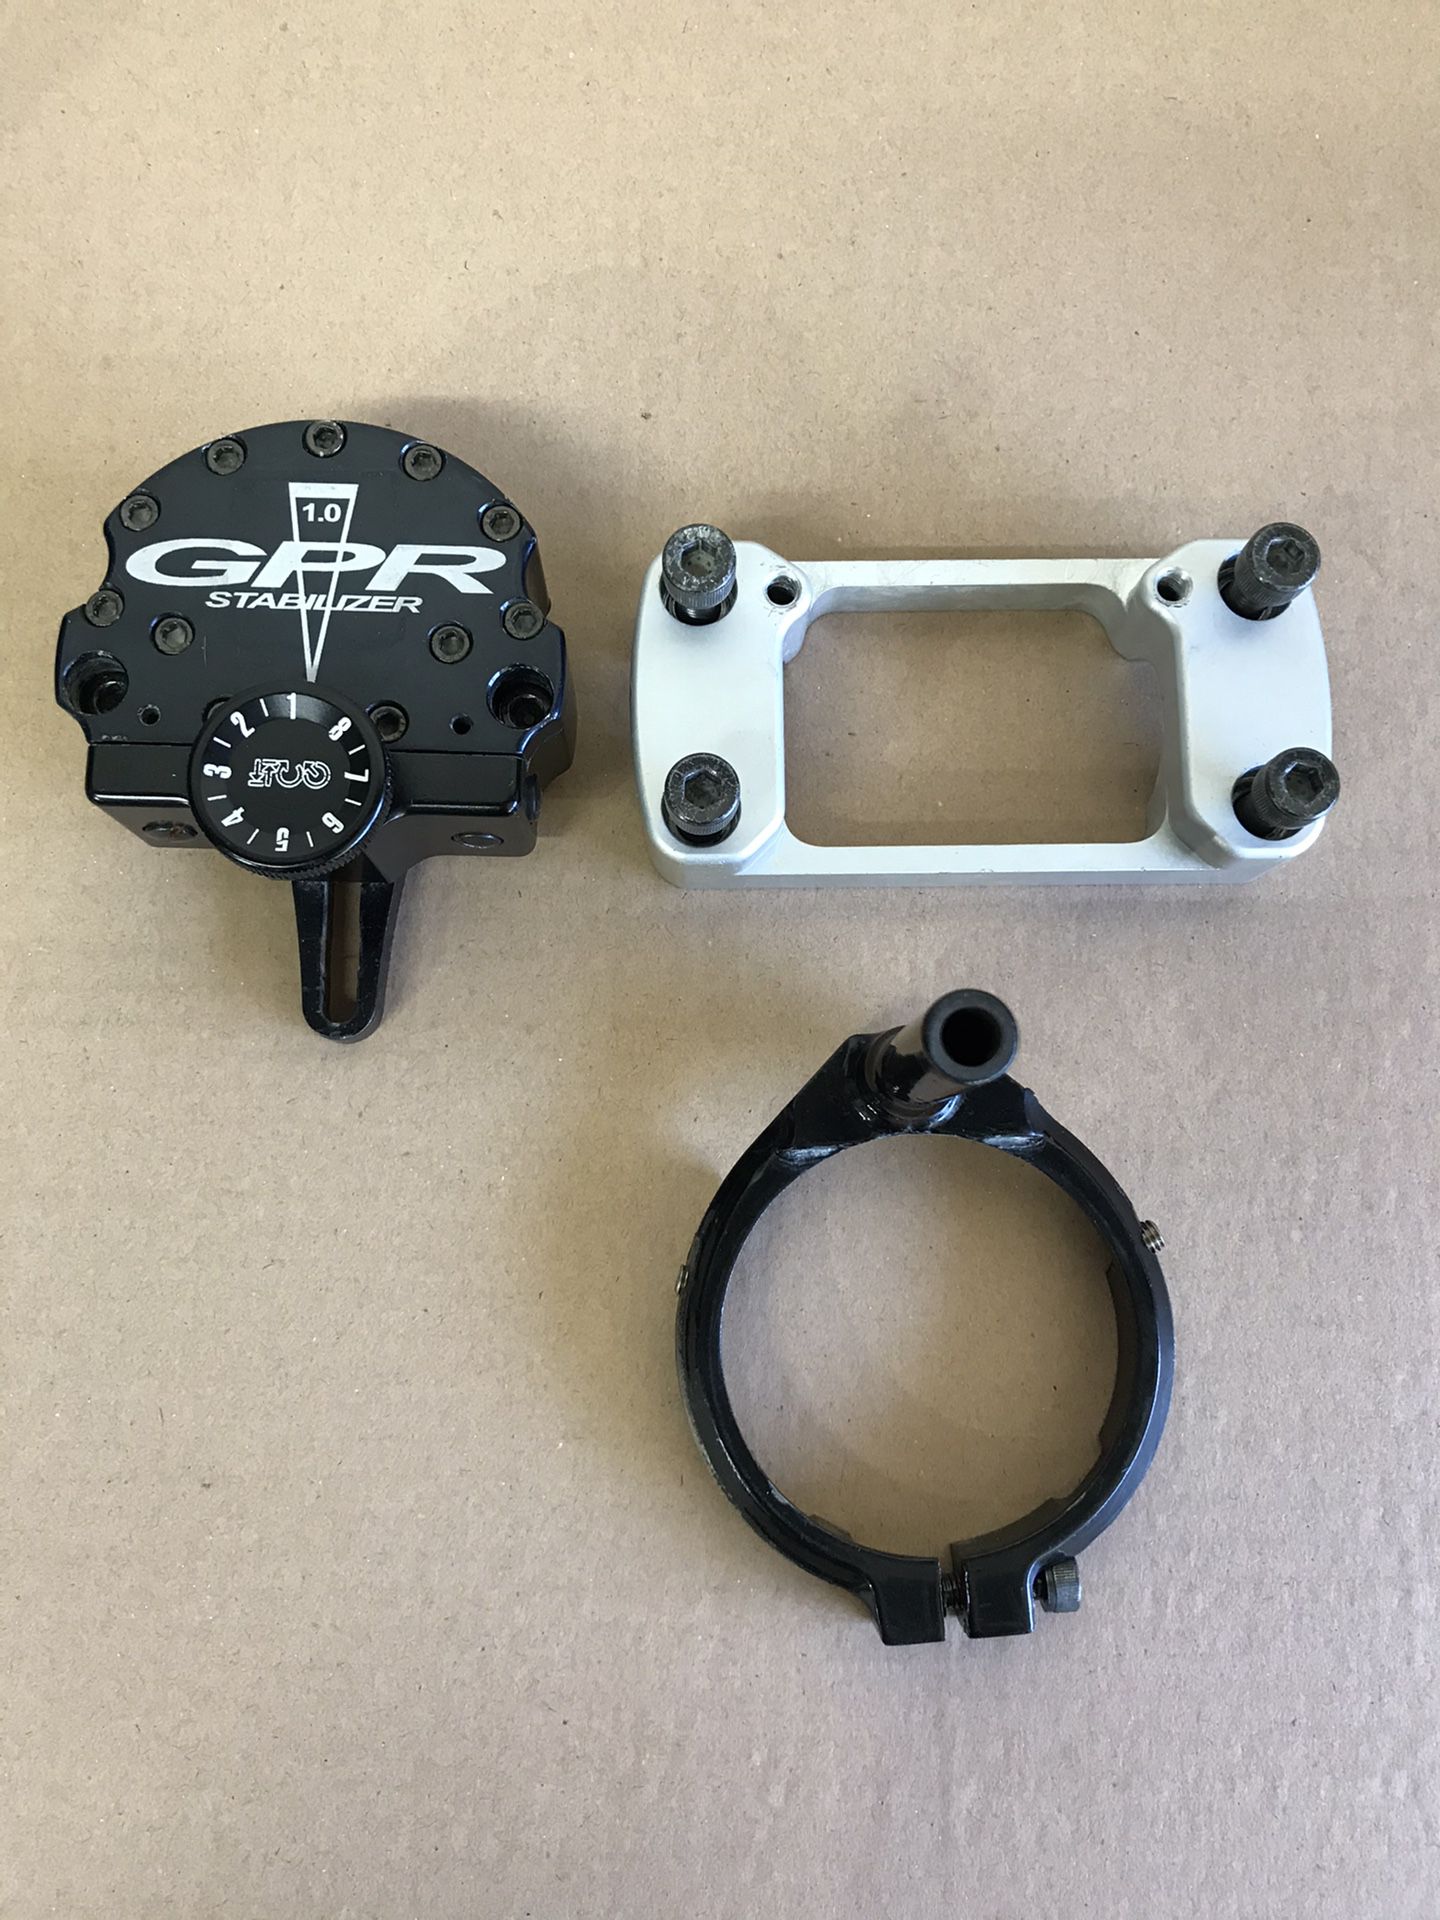 GPR 1.0 Stabilizer and mounting hardware for Aluminum YZ250 and YZ125